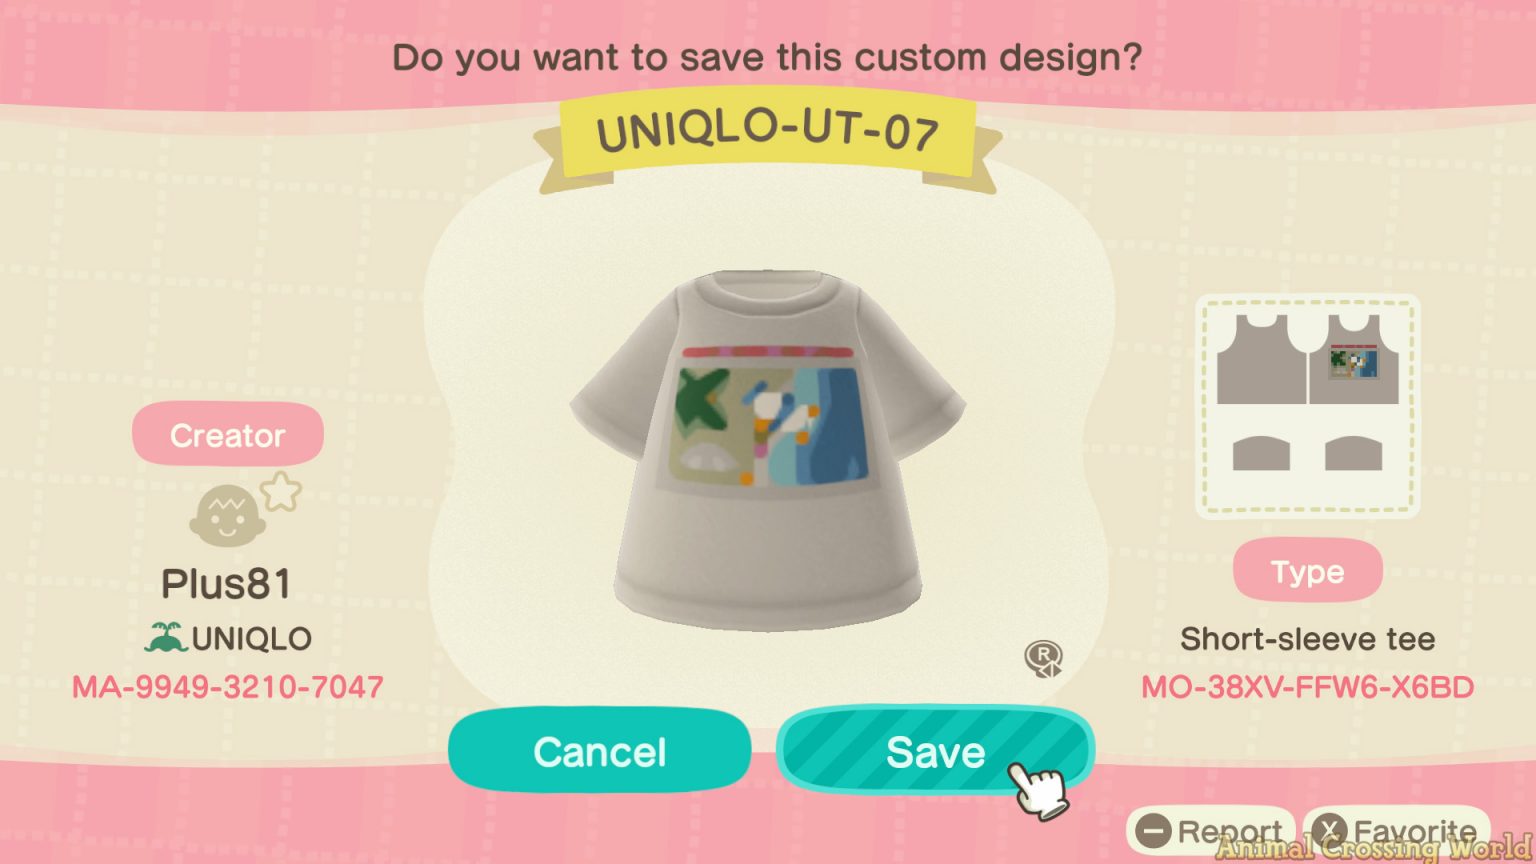 UNIQLO Dream Island Opens With Clothing Designs For Your Animal